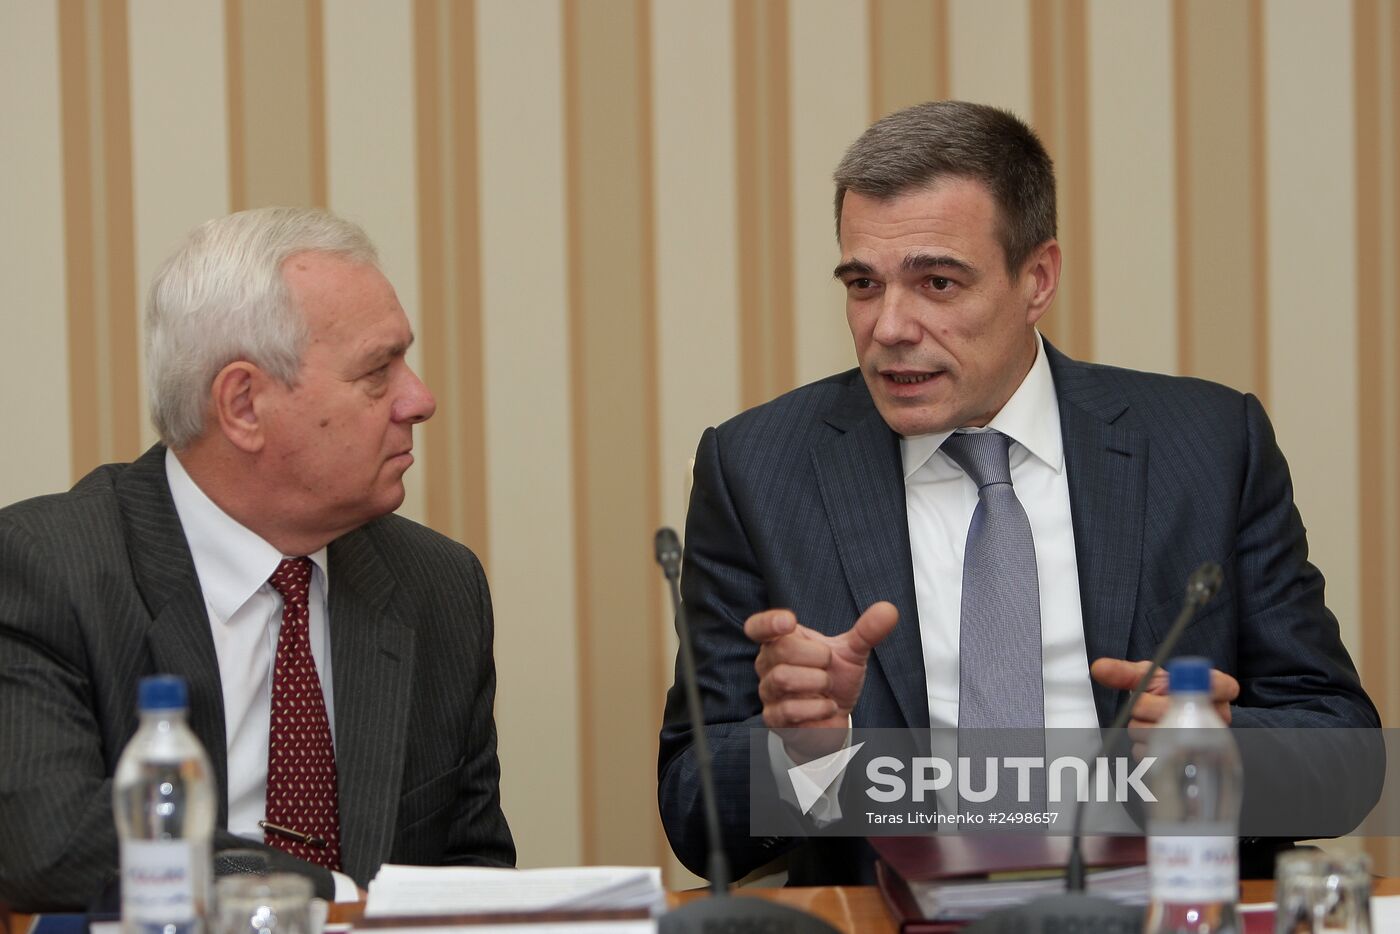 Meeting of Crimean Council of Ministers